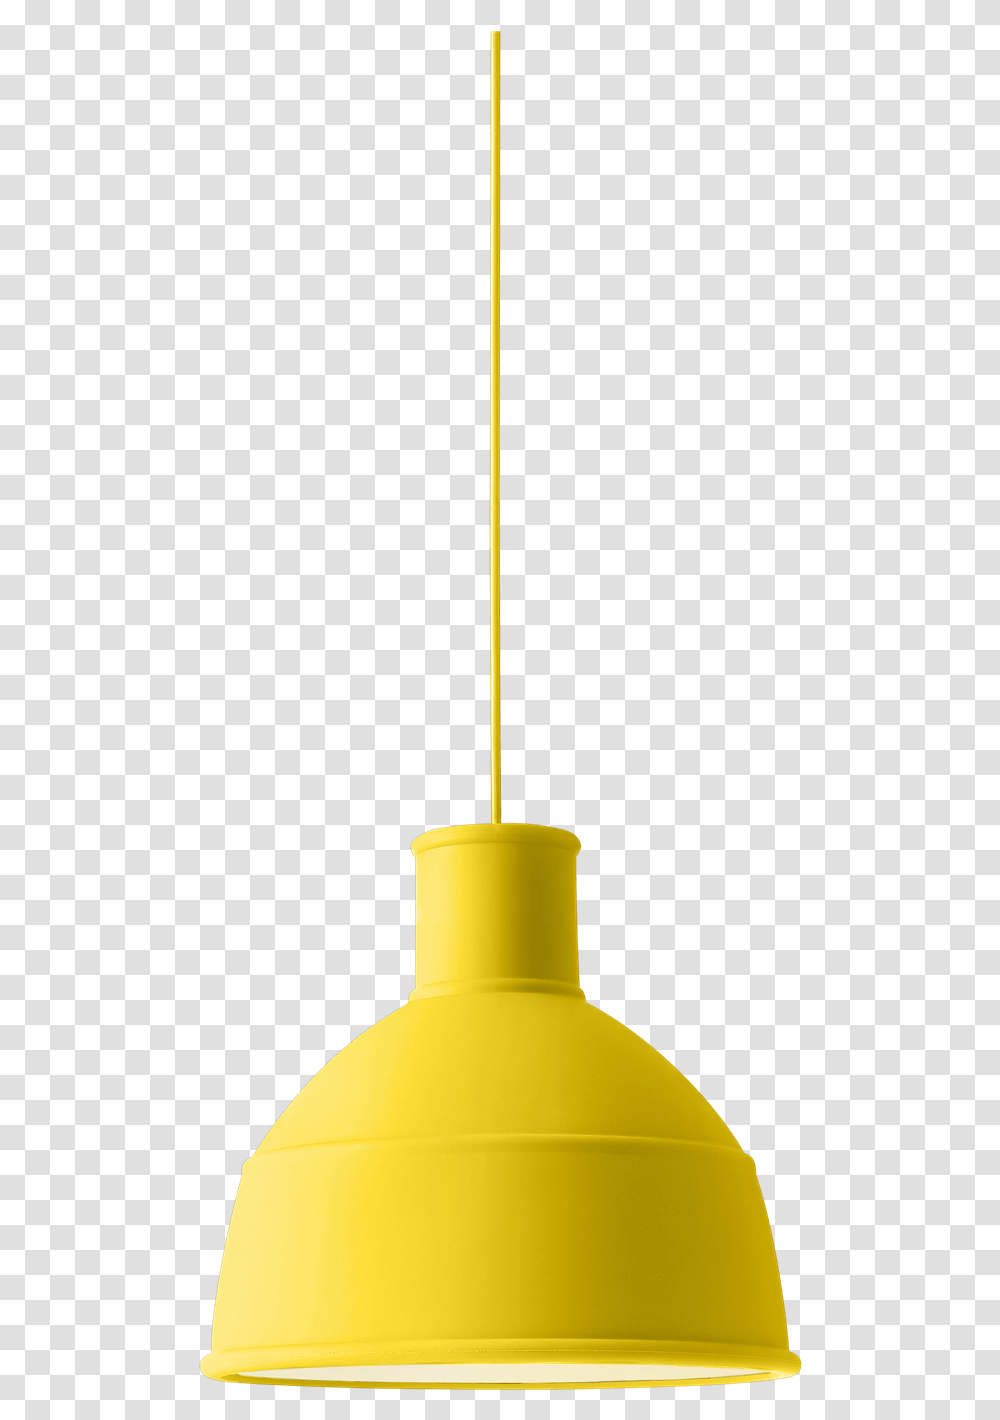 Unfold Pendant Lamp A To Brighten Any Room Yellow Light, Candle, Incense Transparent Png